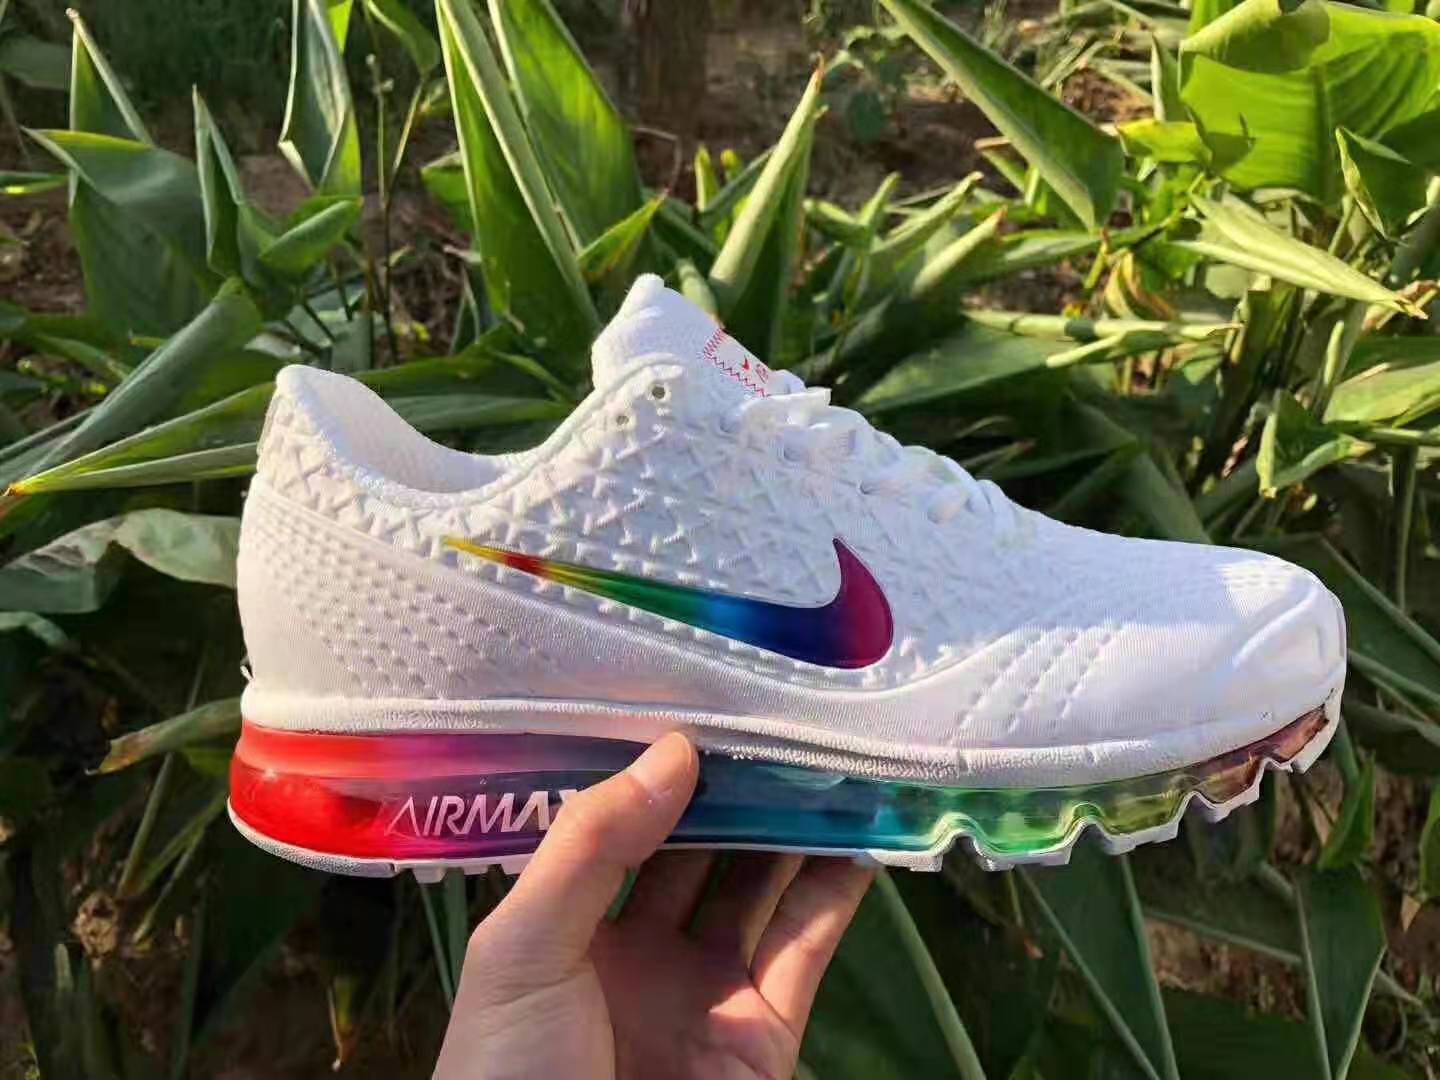 Men's Hot sale Running weapon Nike Air Max 2019 Shoes 090